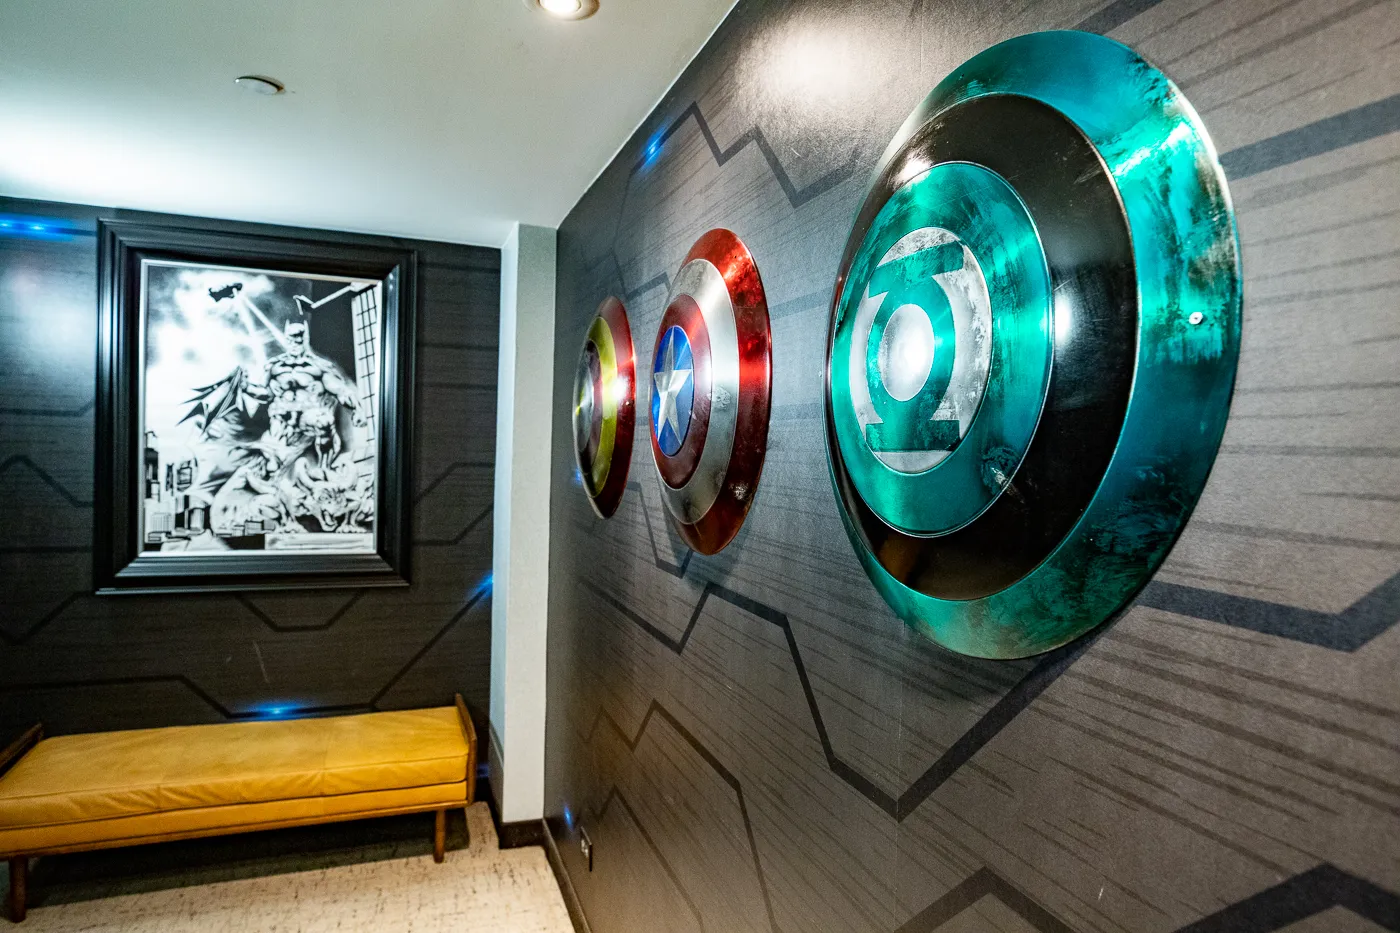 Avengers shields on the superhero floor of The Curtis Hotel - a Themed Hotel in Denver, Colorado